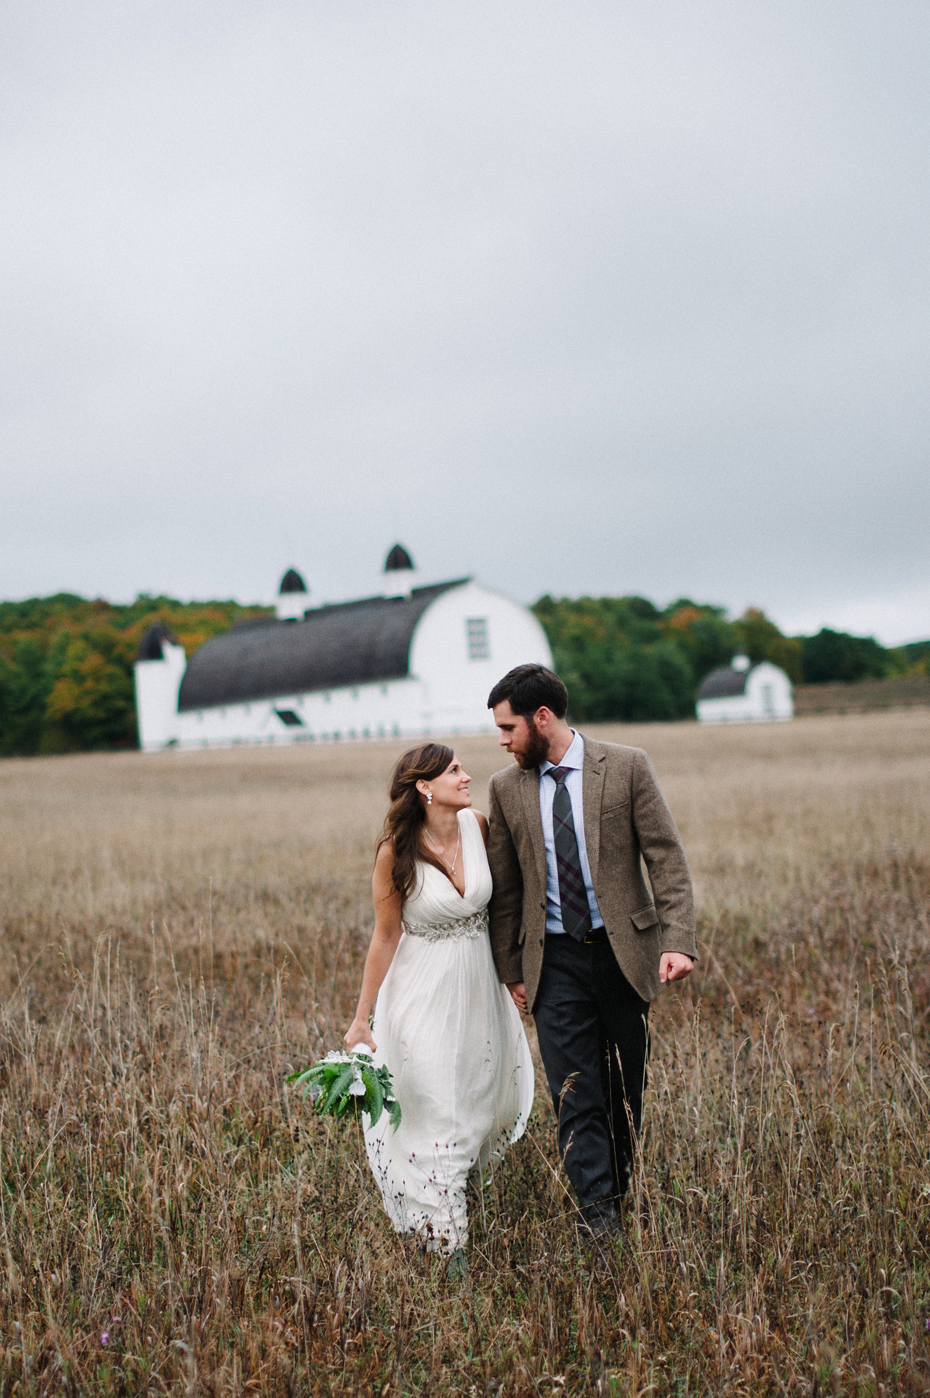 Bride and groom pose for portraits in a Northern Michigan field near Sleeping Bear Dunes after their elopement by Ann Arbor Michigan Wedding Photographer Heather Jowett.